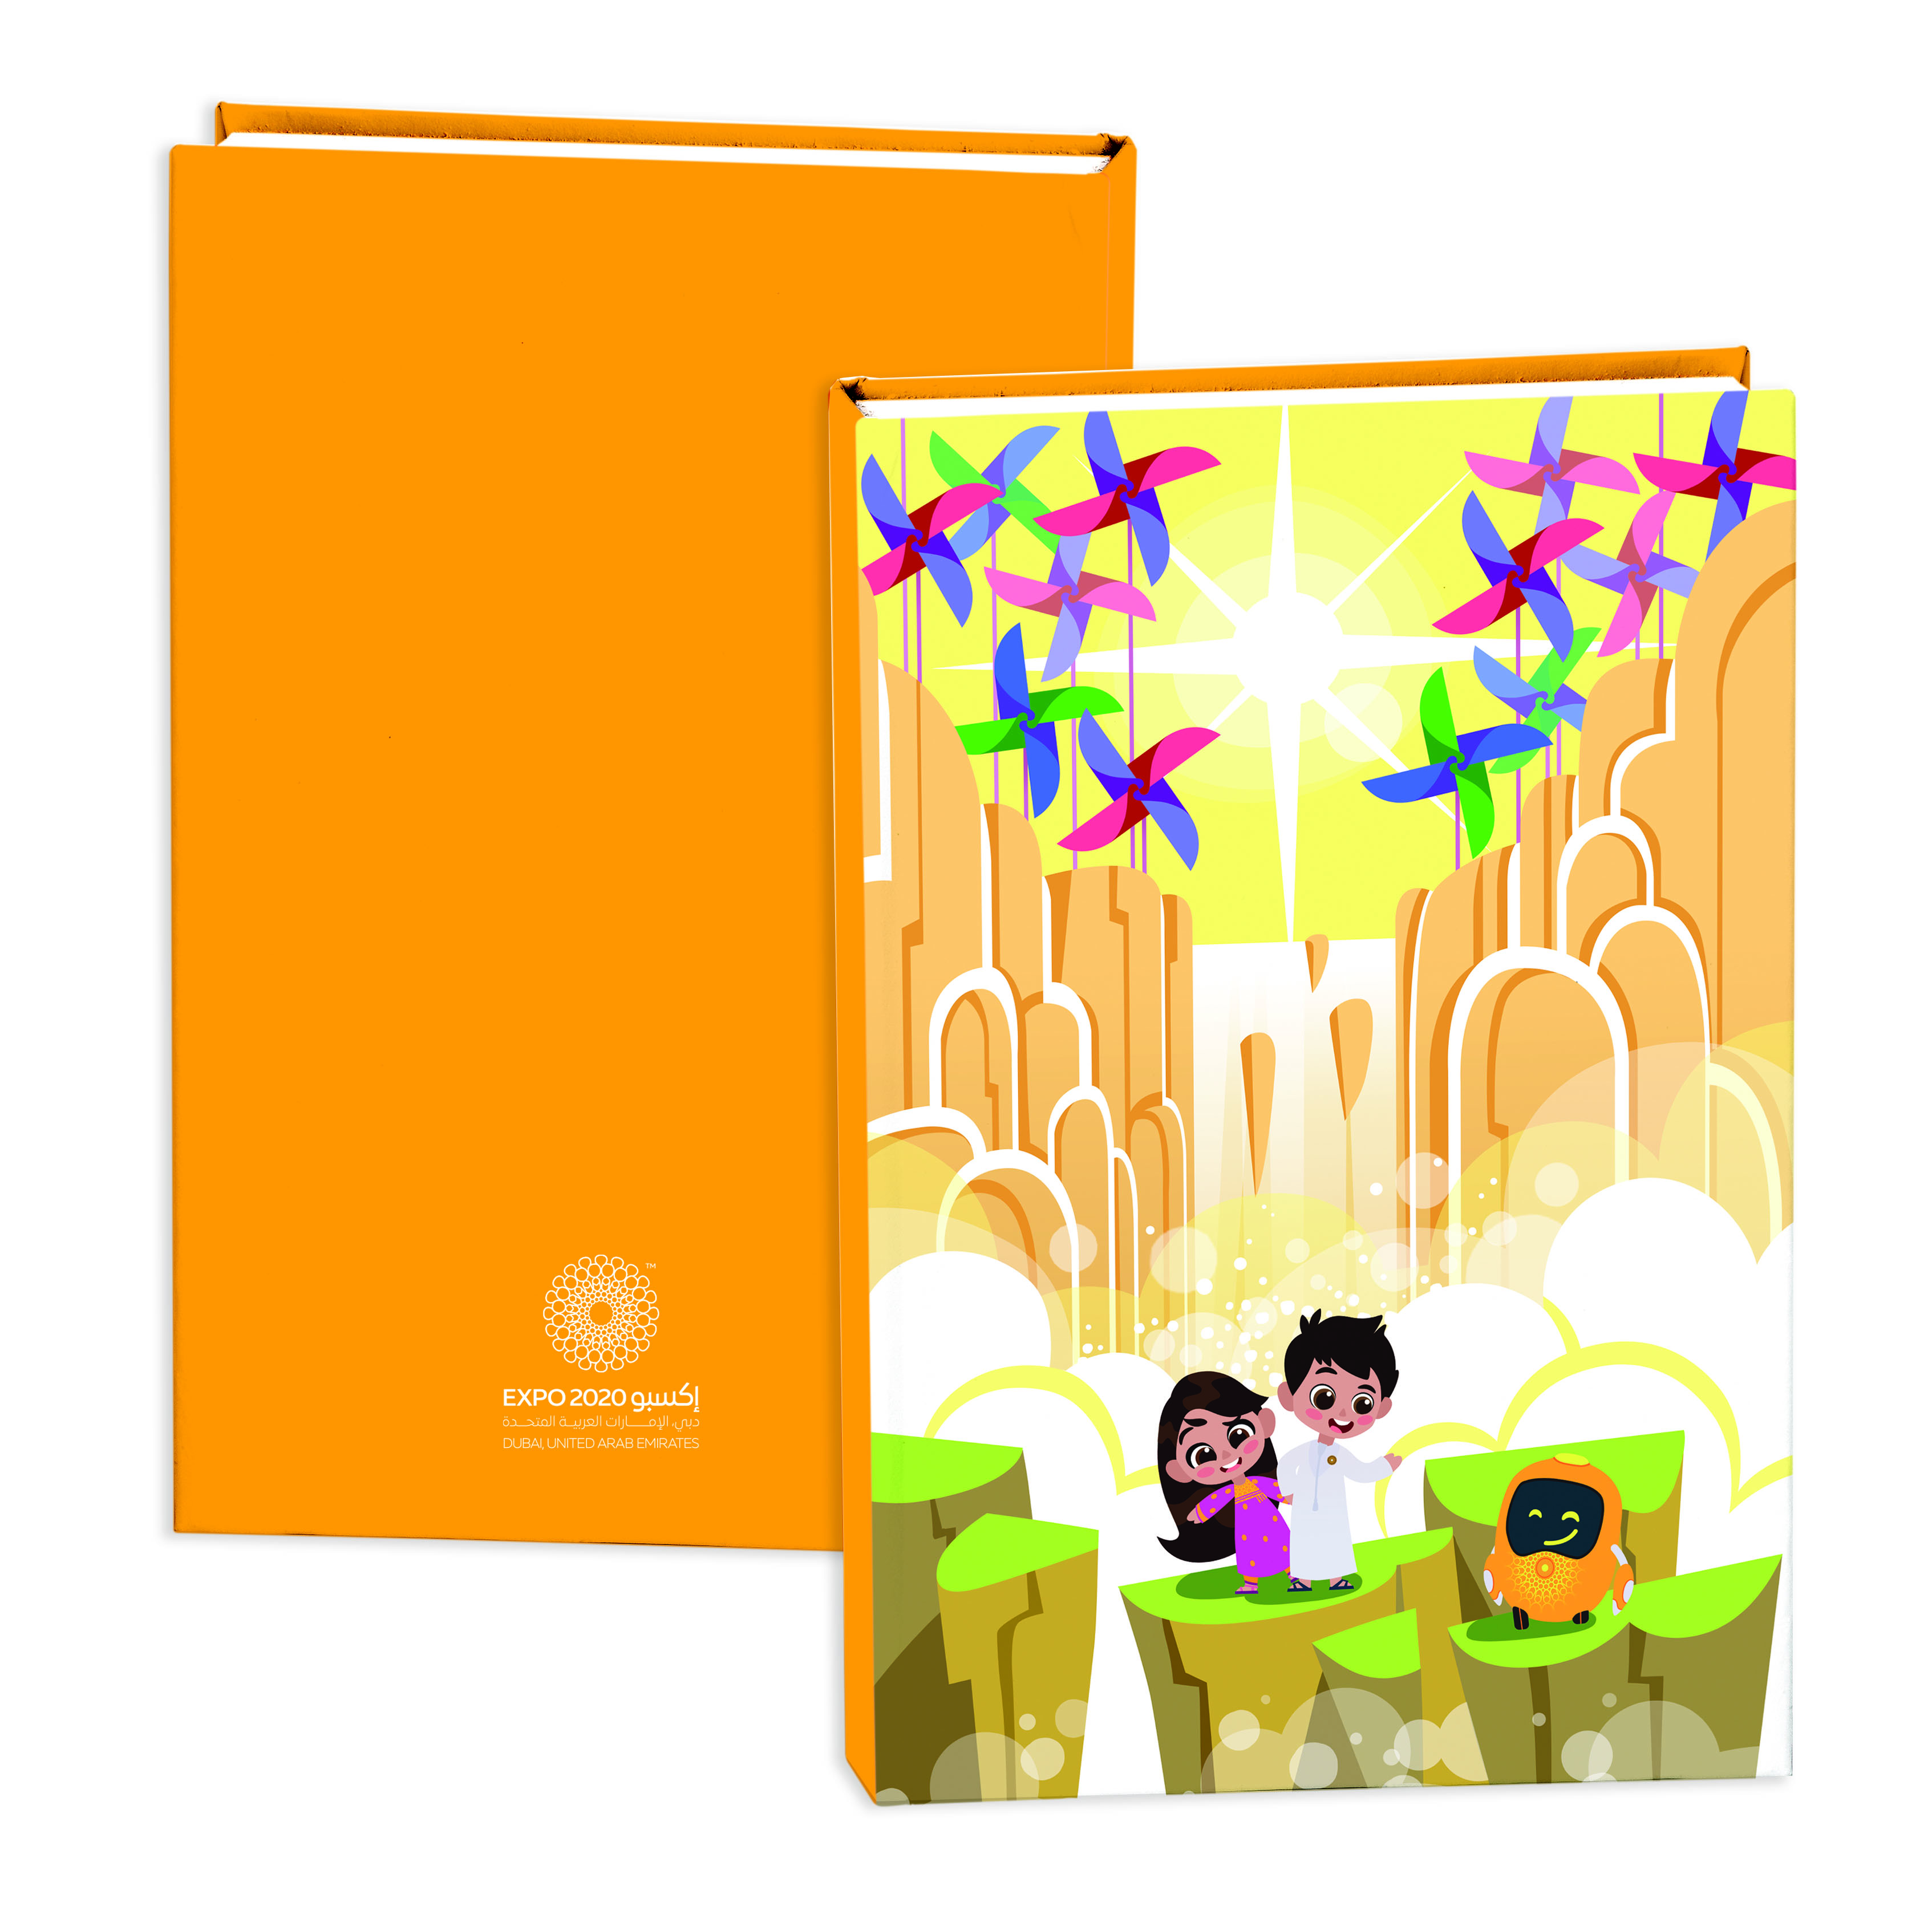 Expo 2020 Dubai Mascots  A4 Hardcase Exercise Books Pack of 2 - 192 Pages